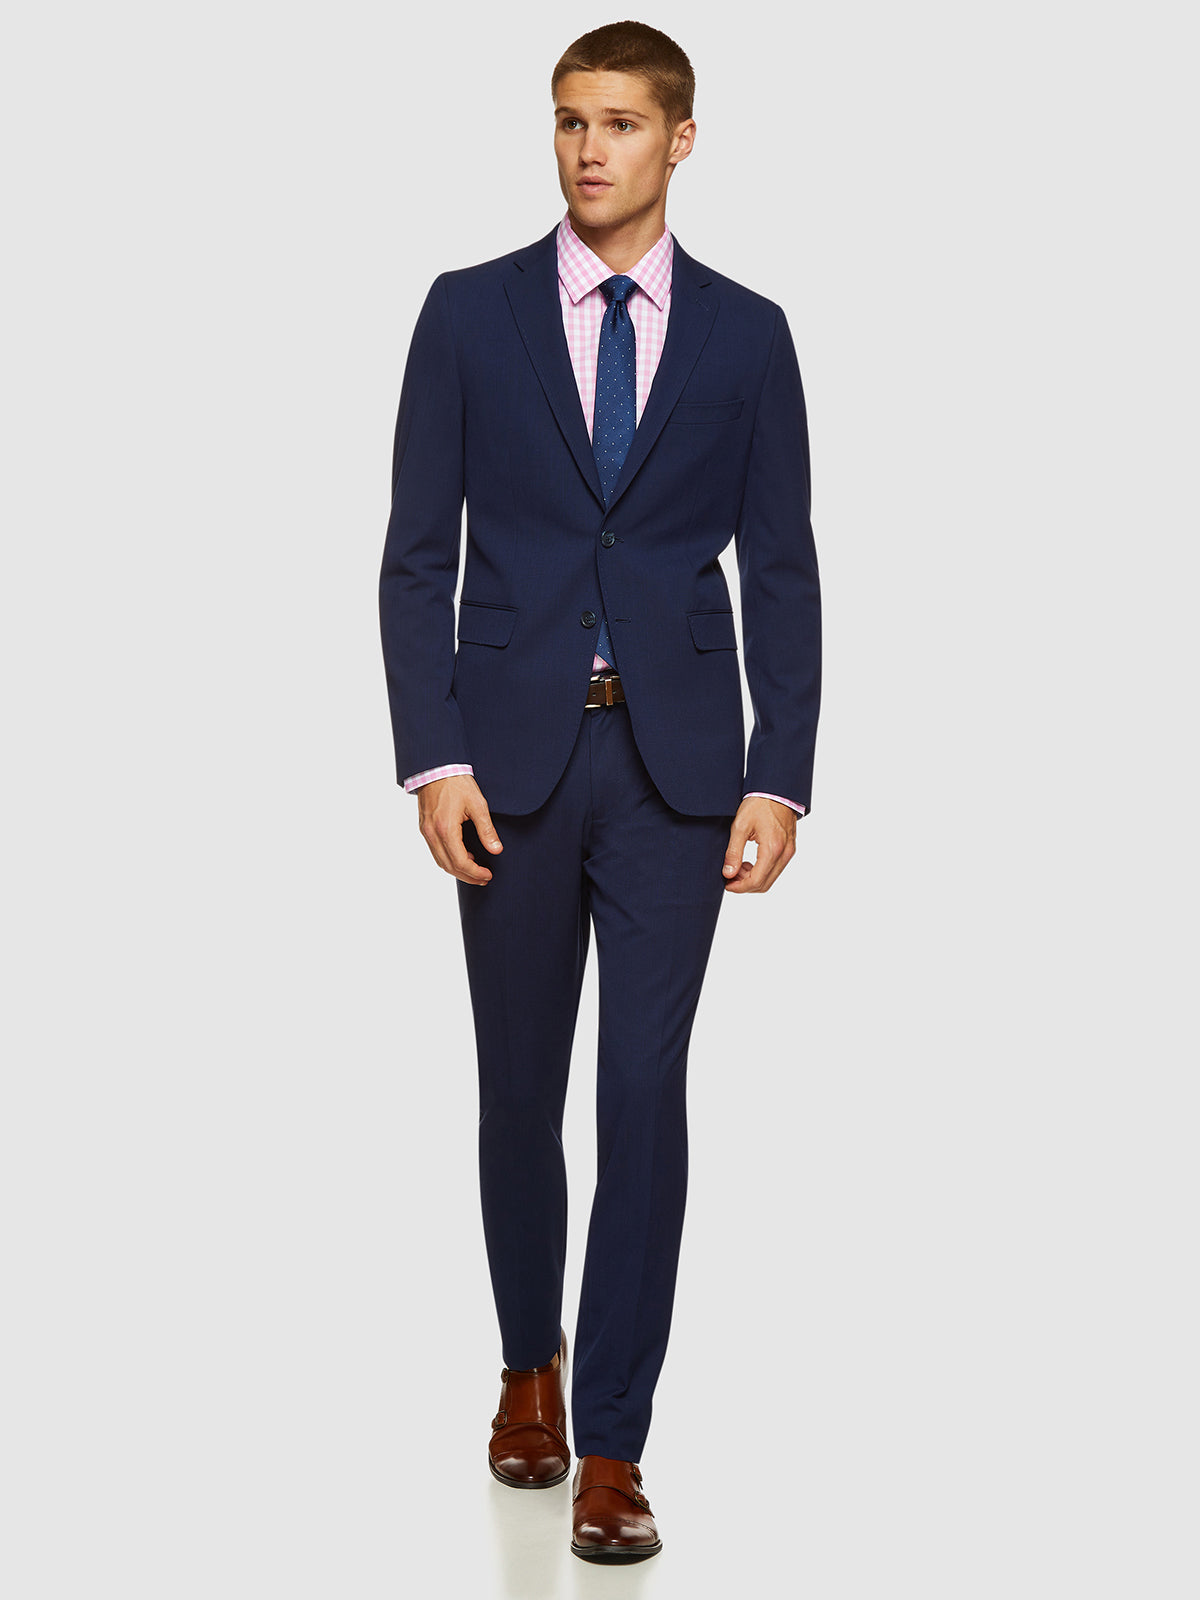 AUDEN ECO CHECKED SUIT TROUSERS NAVY